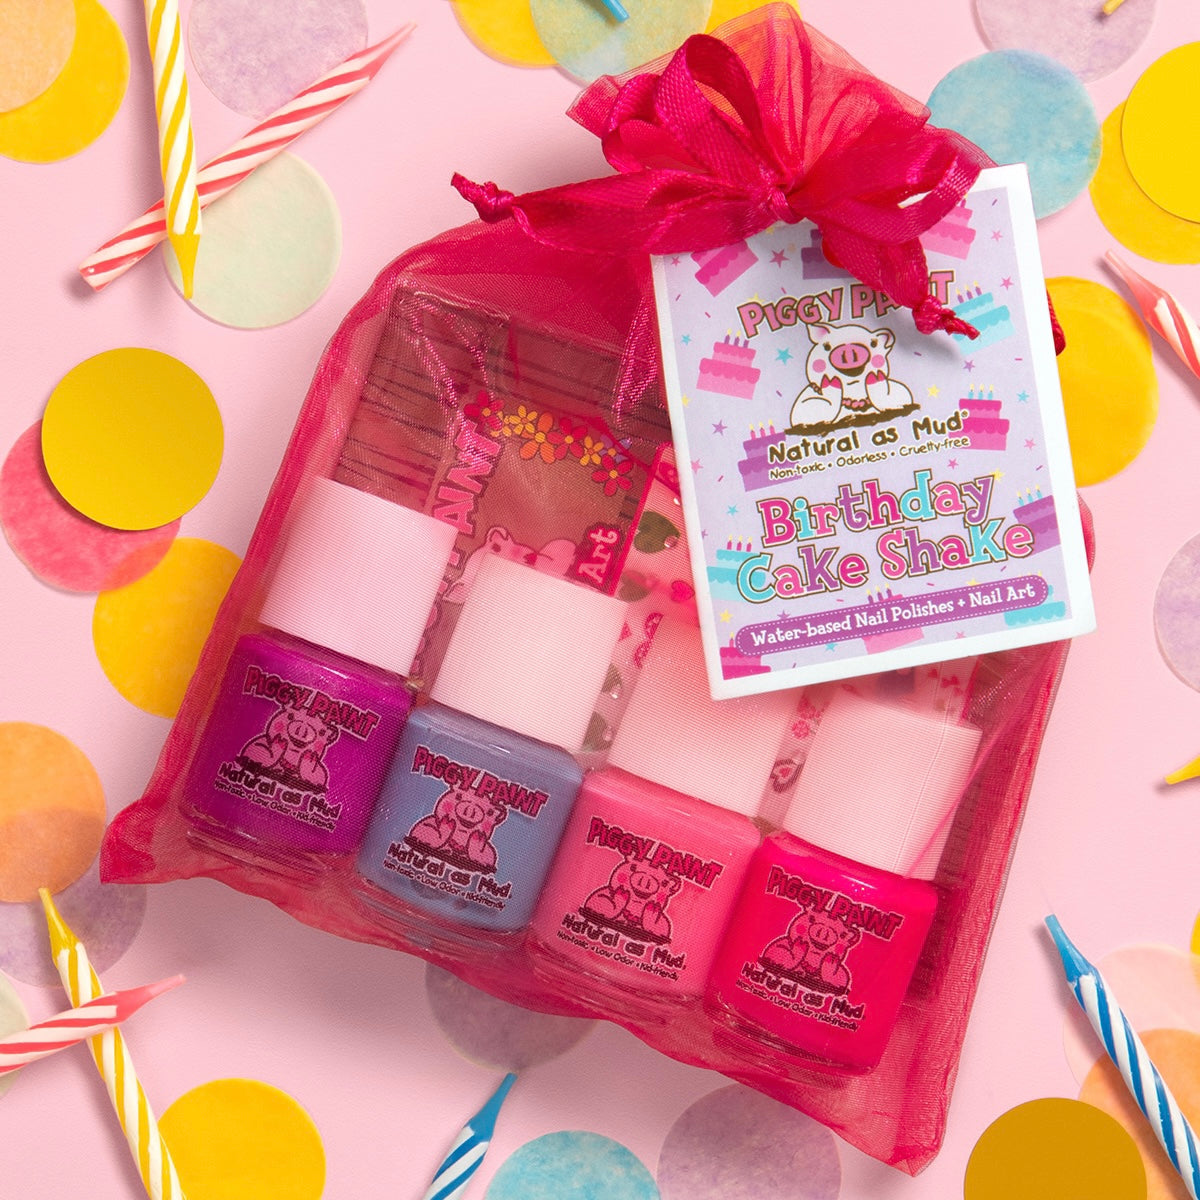 Piggy Paint Always a Bright Side Gift Set